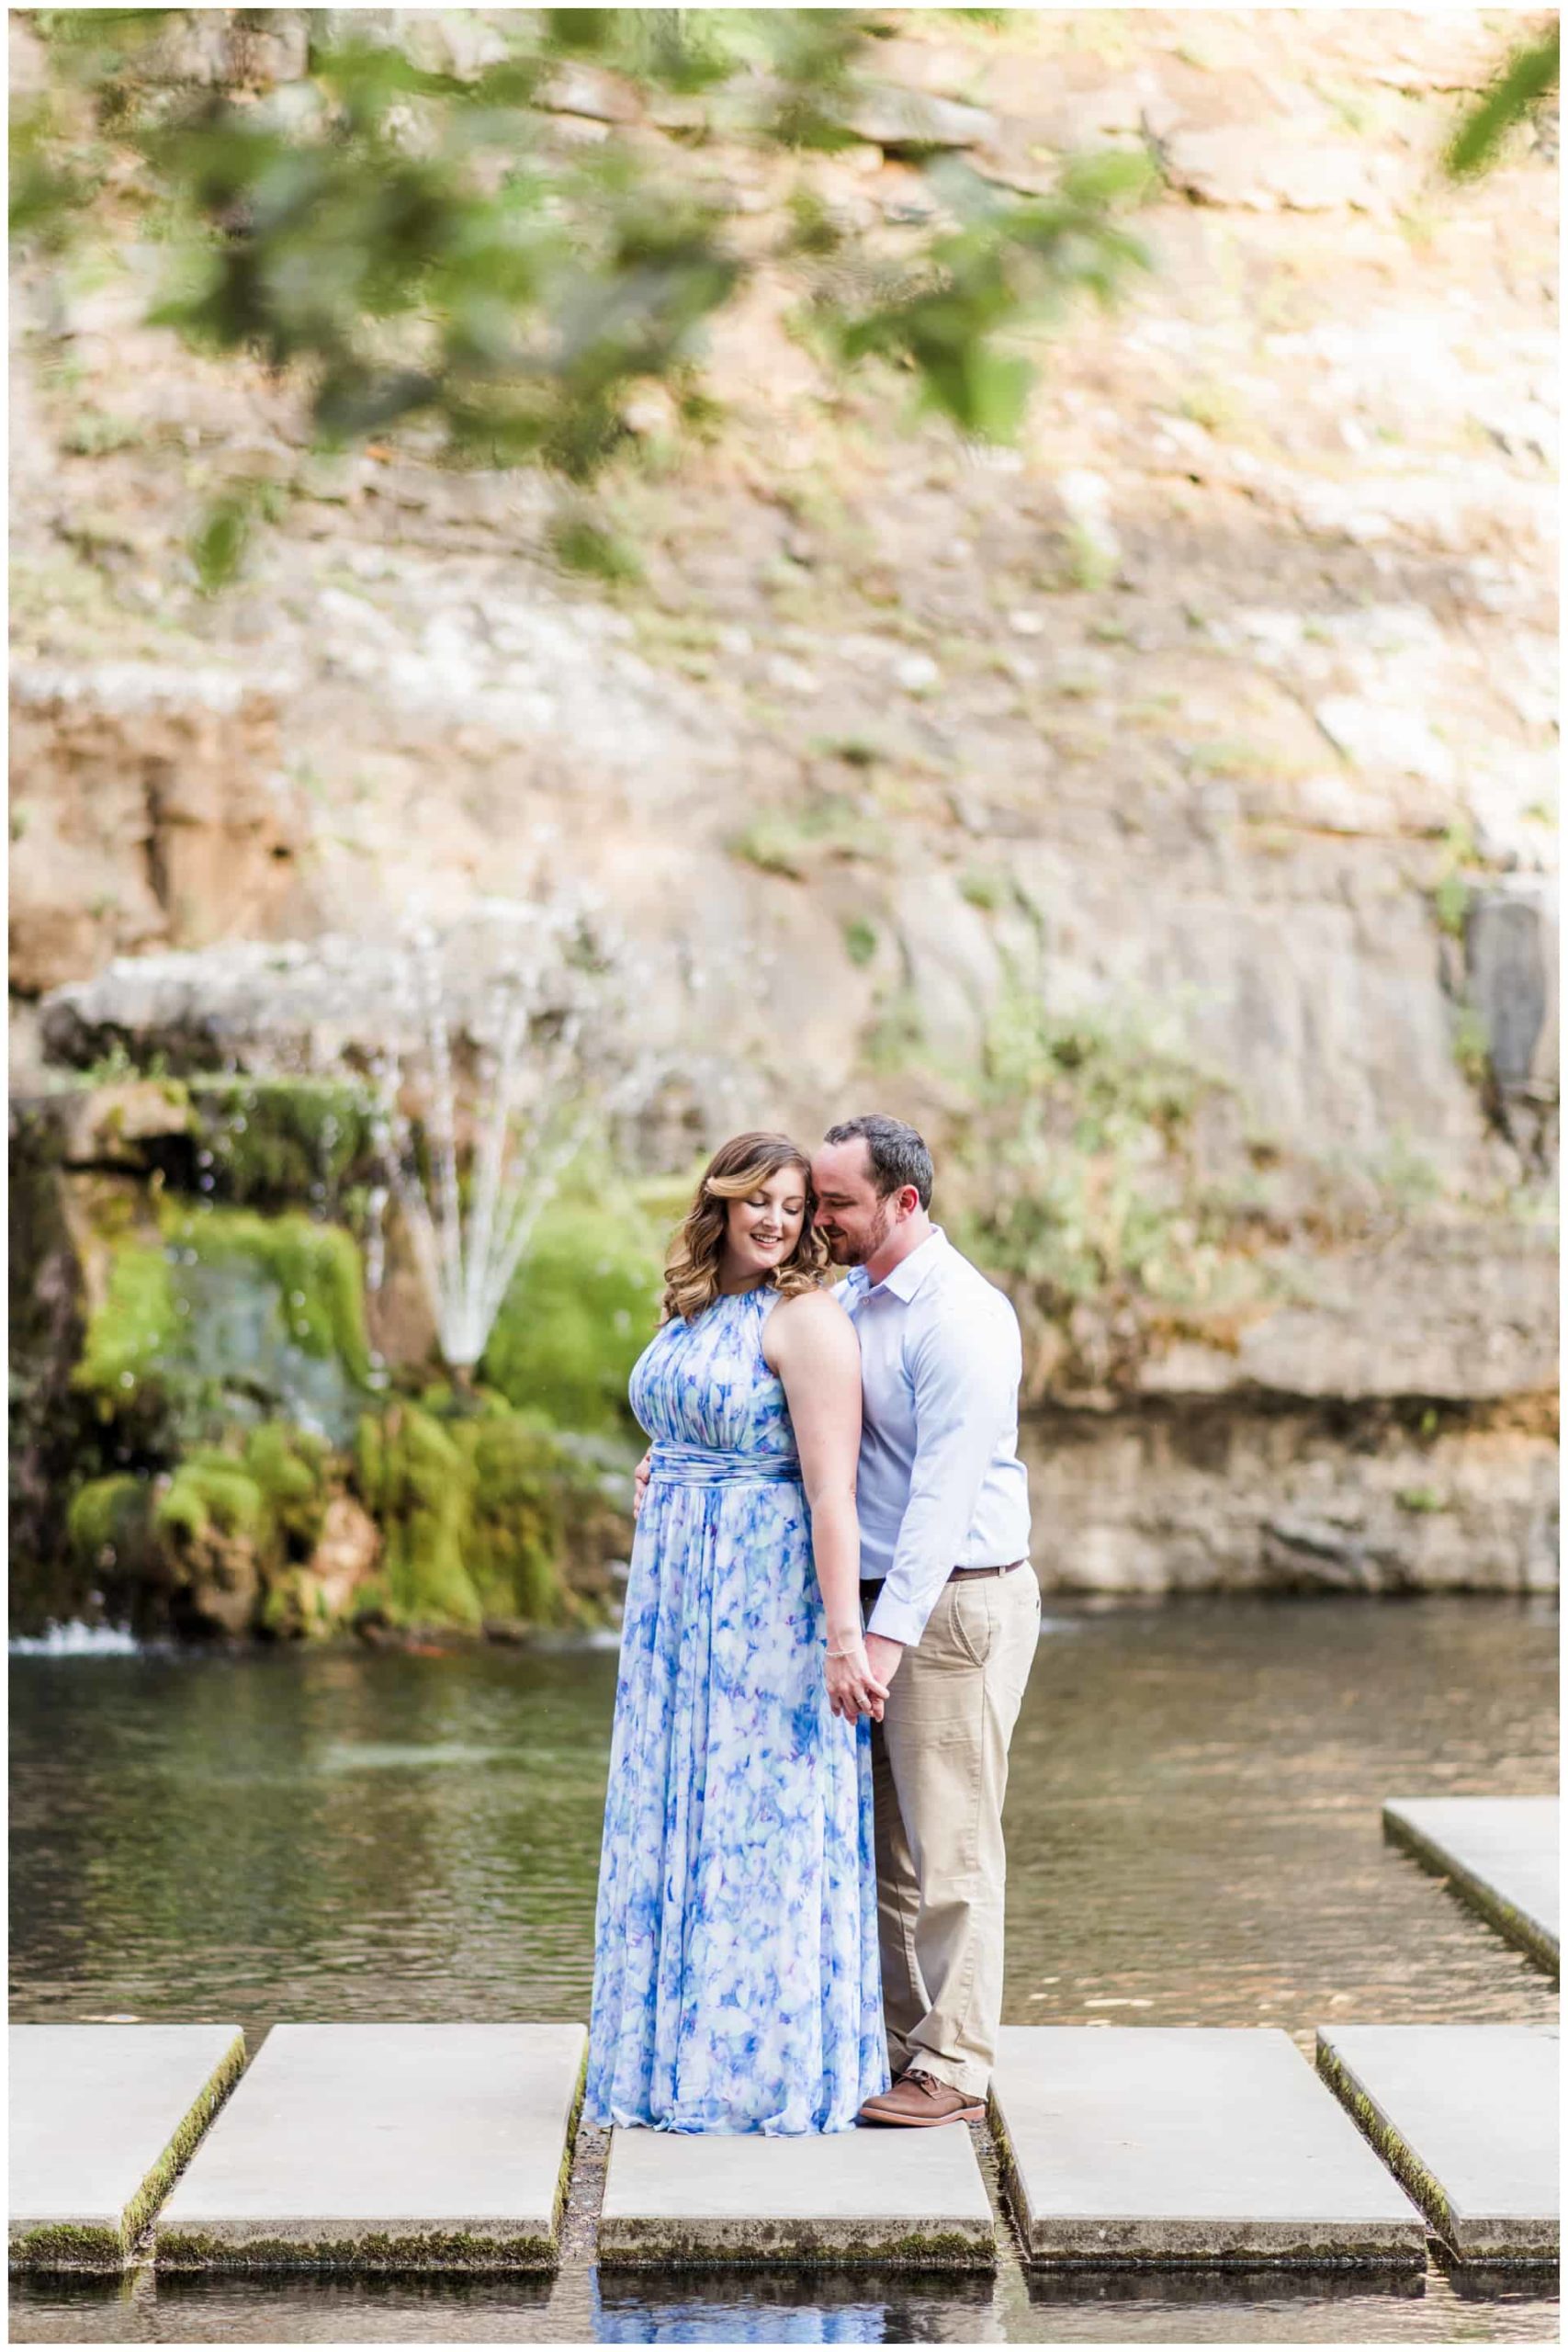 connie-jon-downtown-huntsville-engagement-session-with-dog-7